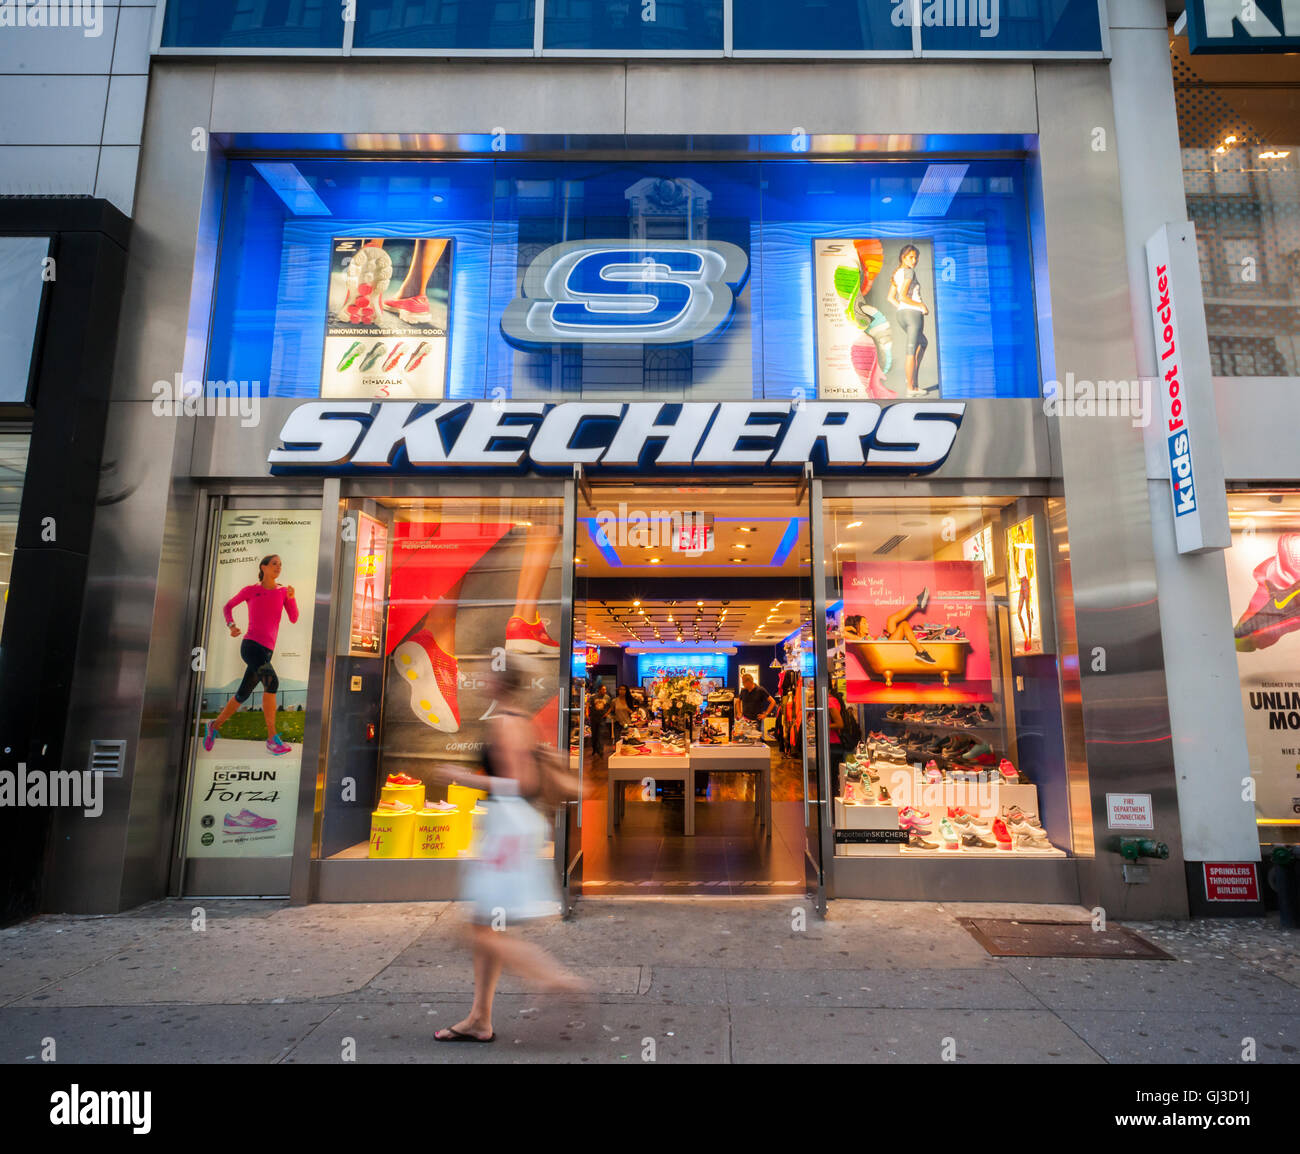 skechers new york times square